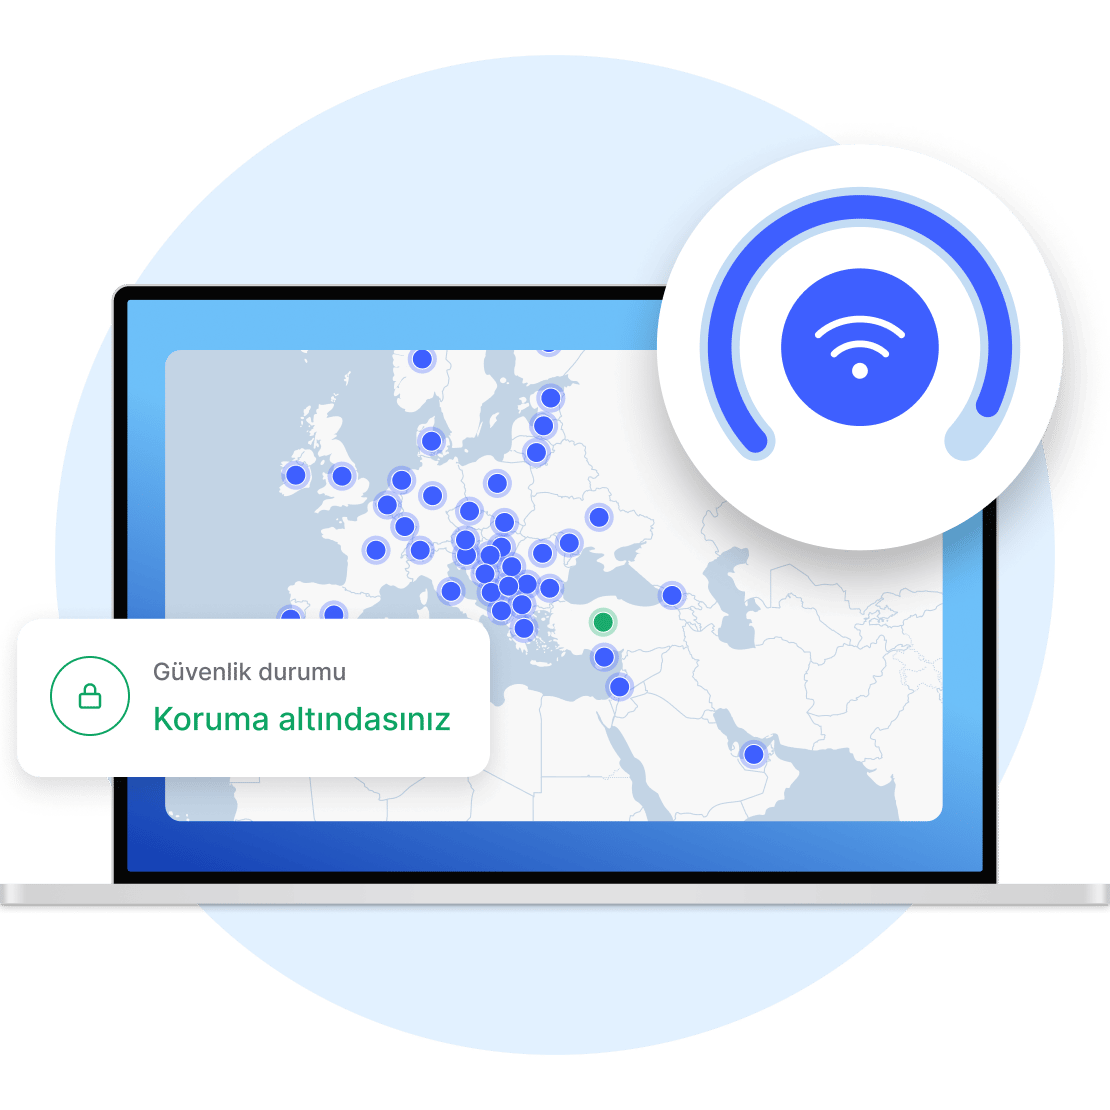 Using NordVPN on multiple devices.